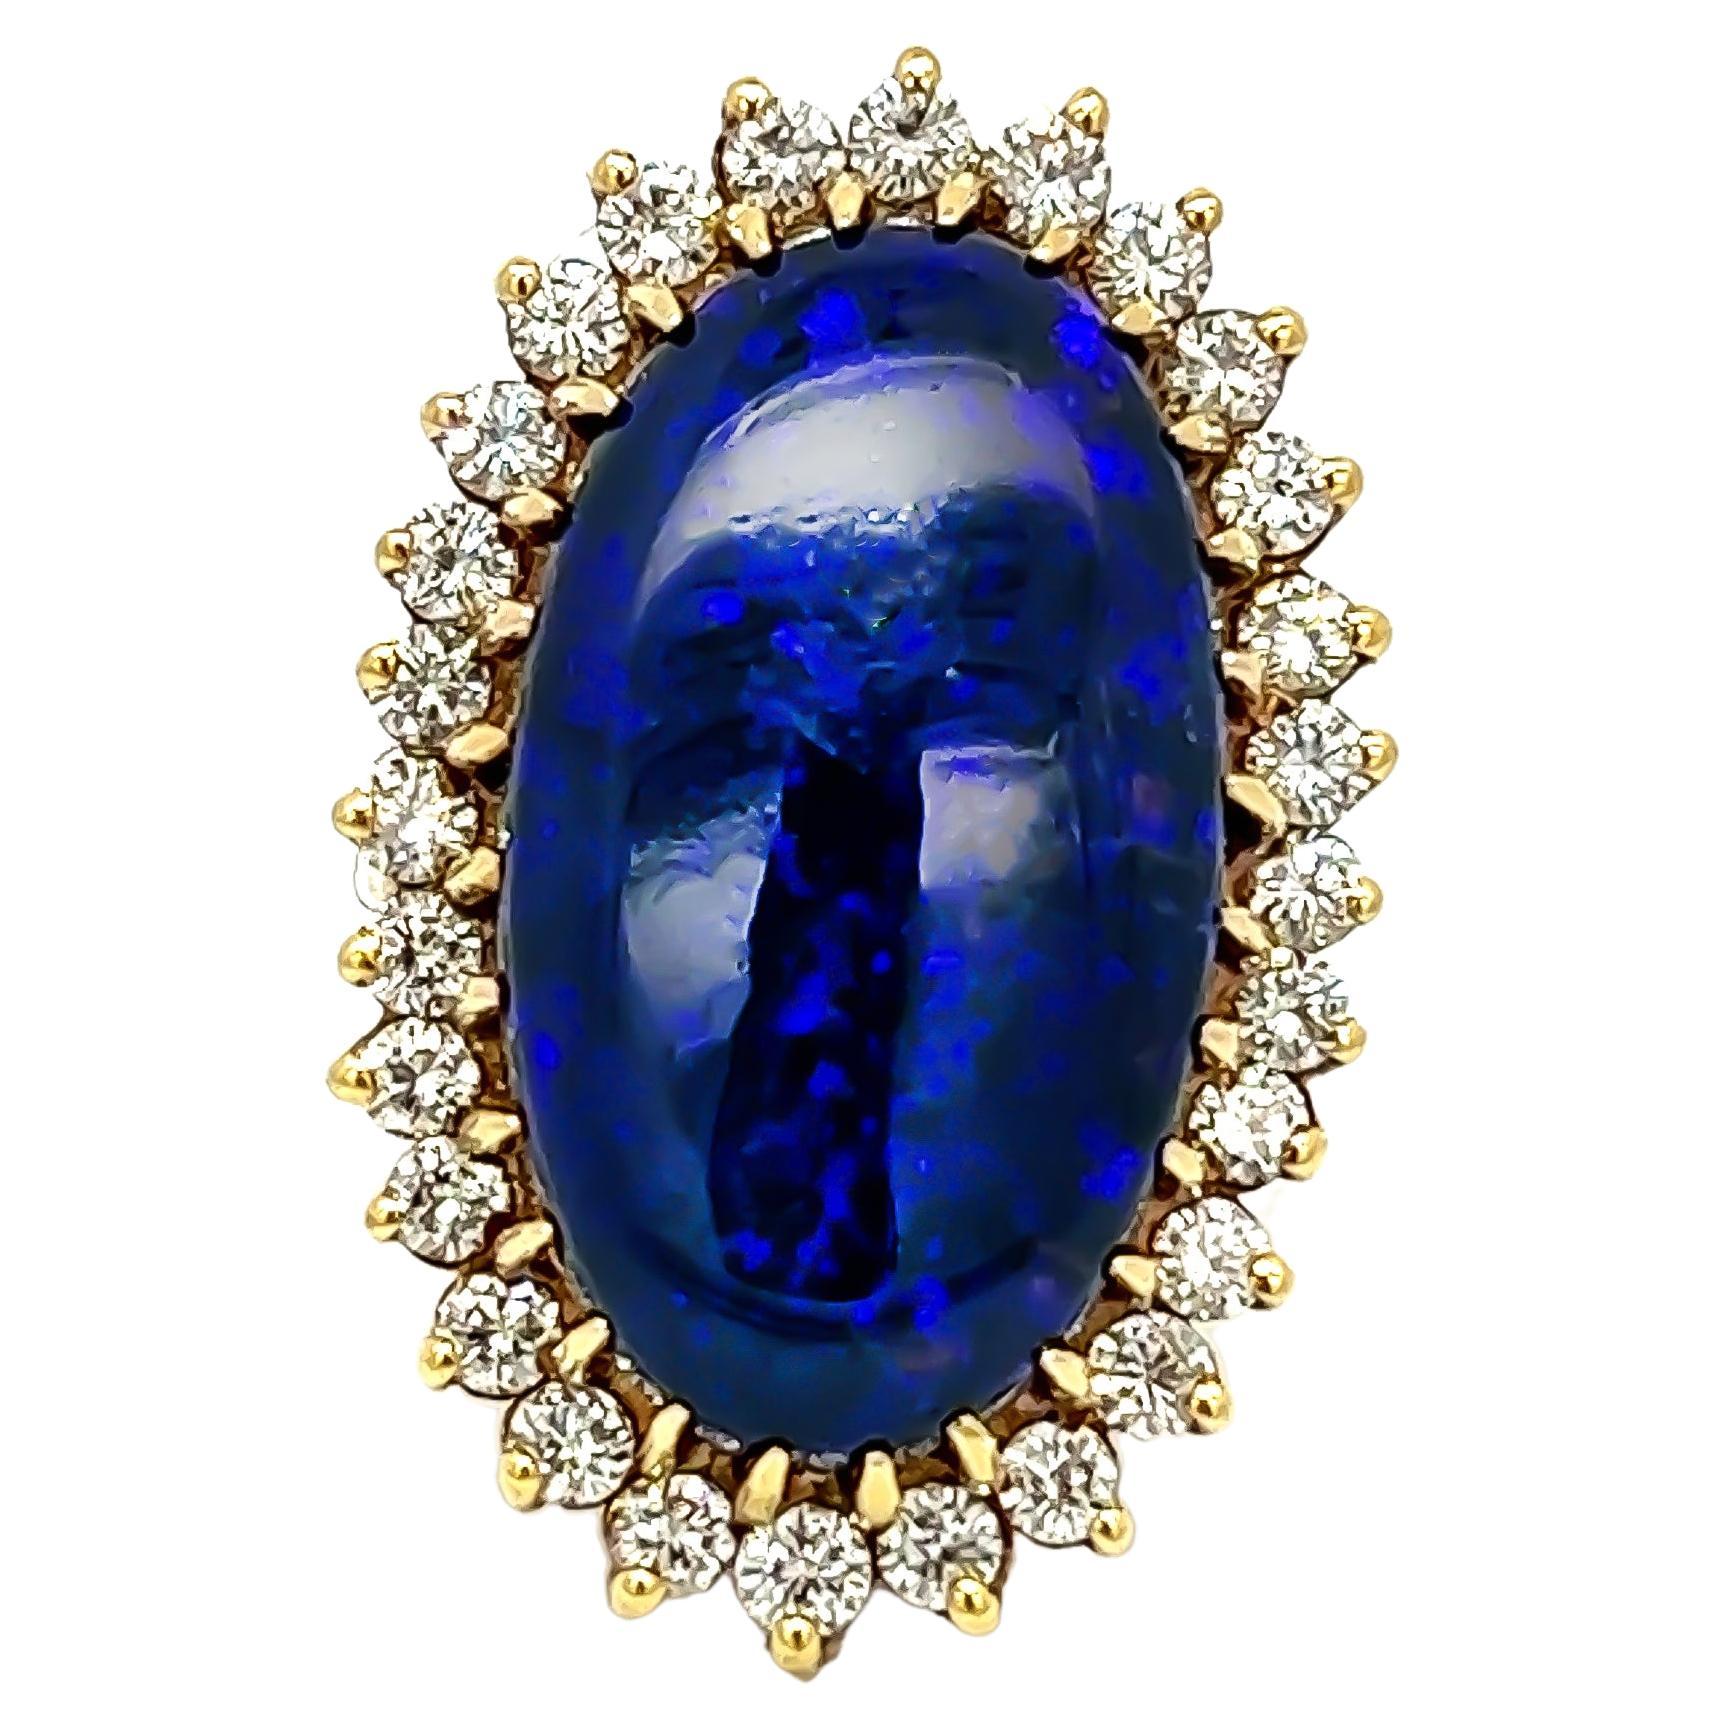 11.80Grams Black Opal & Diamonds Ring, Set in 18K Yellow Gold For Sale